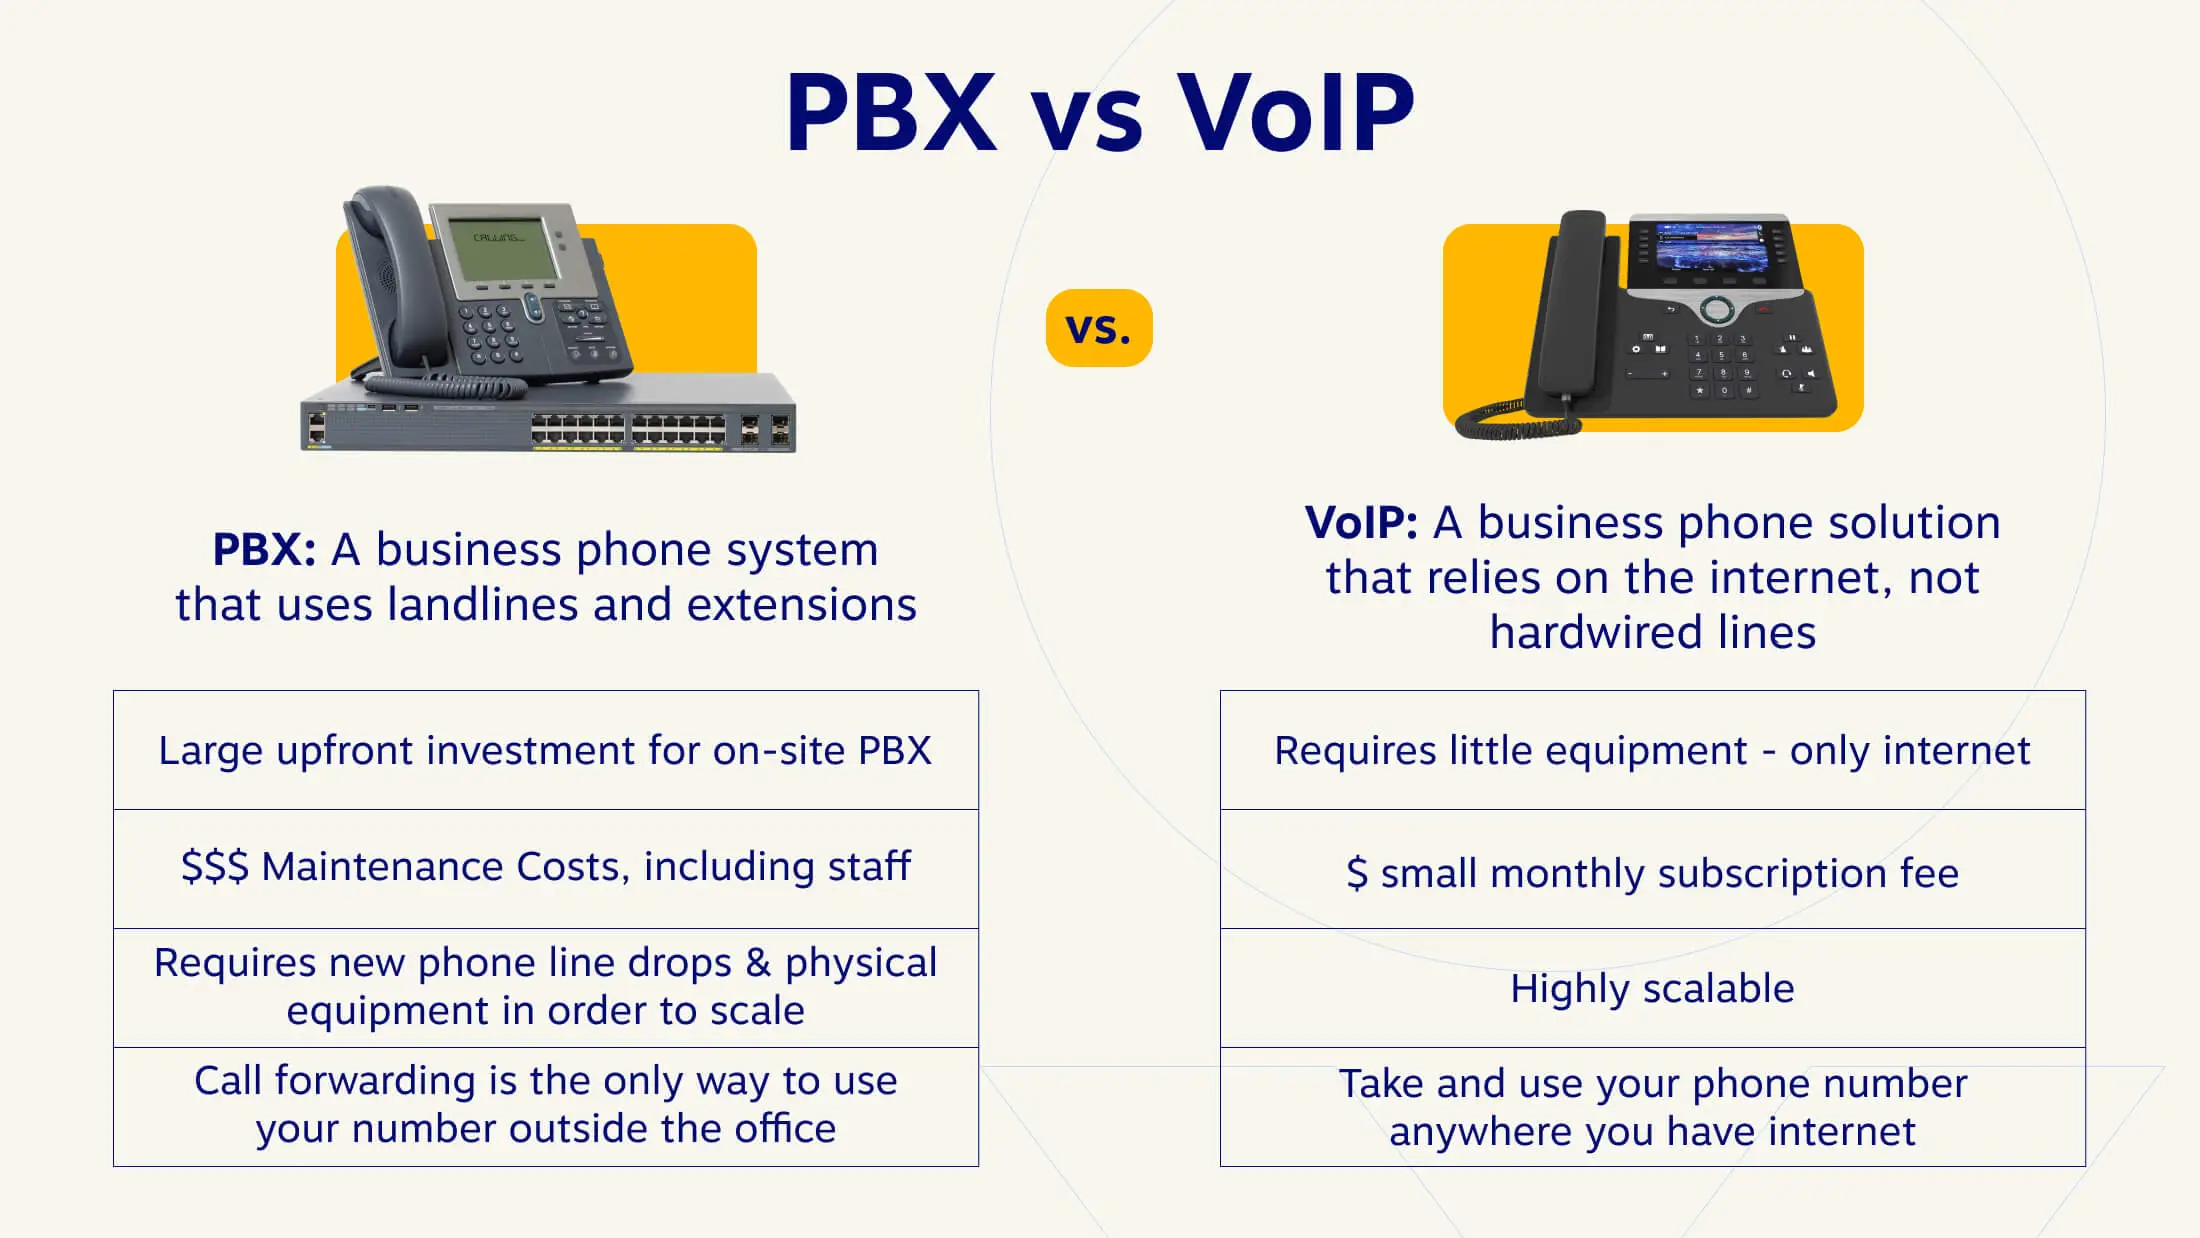 PBX VoIP A business phone system that uses landlines and extensions A business phone solution that relies on the internet, not hardwired lines Large upfront investment for on-site PBX Requires little equipment - only internet $$$ Maintenance Costs, including staff $ small monthly subscription fee Requires new phone line drops & physical equipment in order to scale Highly scalable Call forwarding is the only way to use your number outside the office Take and use your phone number anywhere you have internet